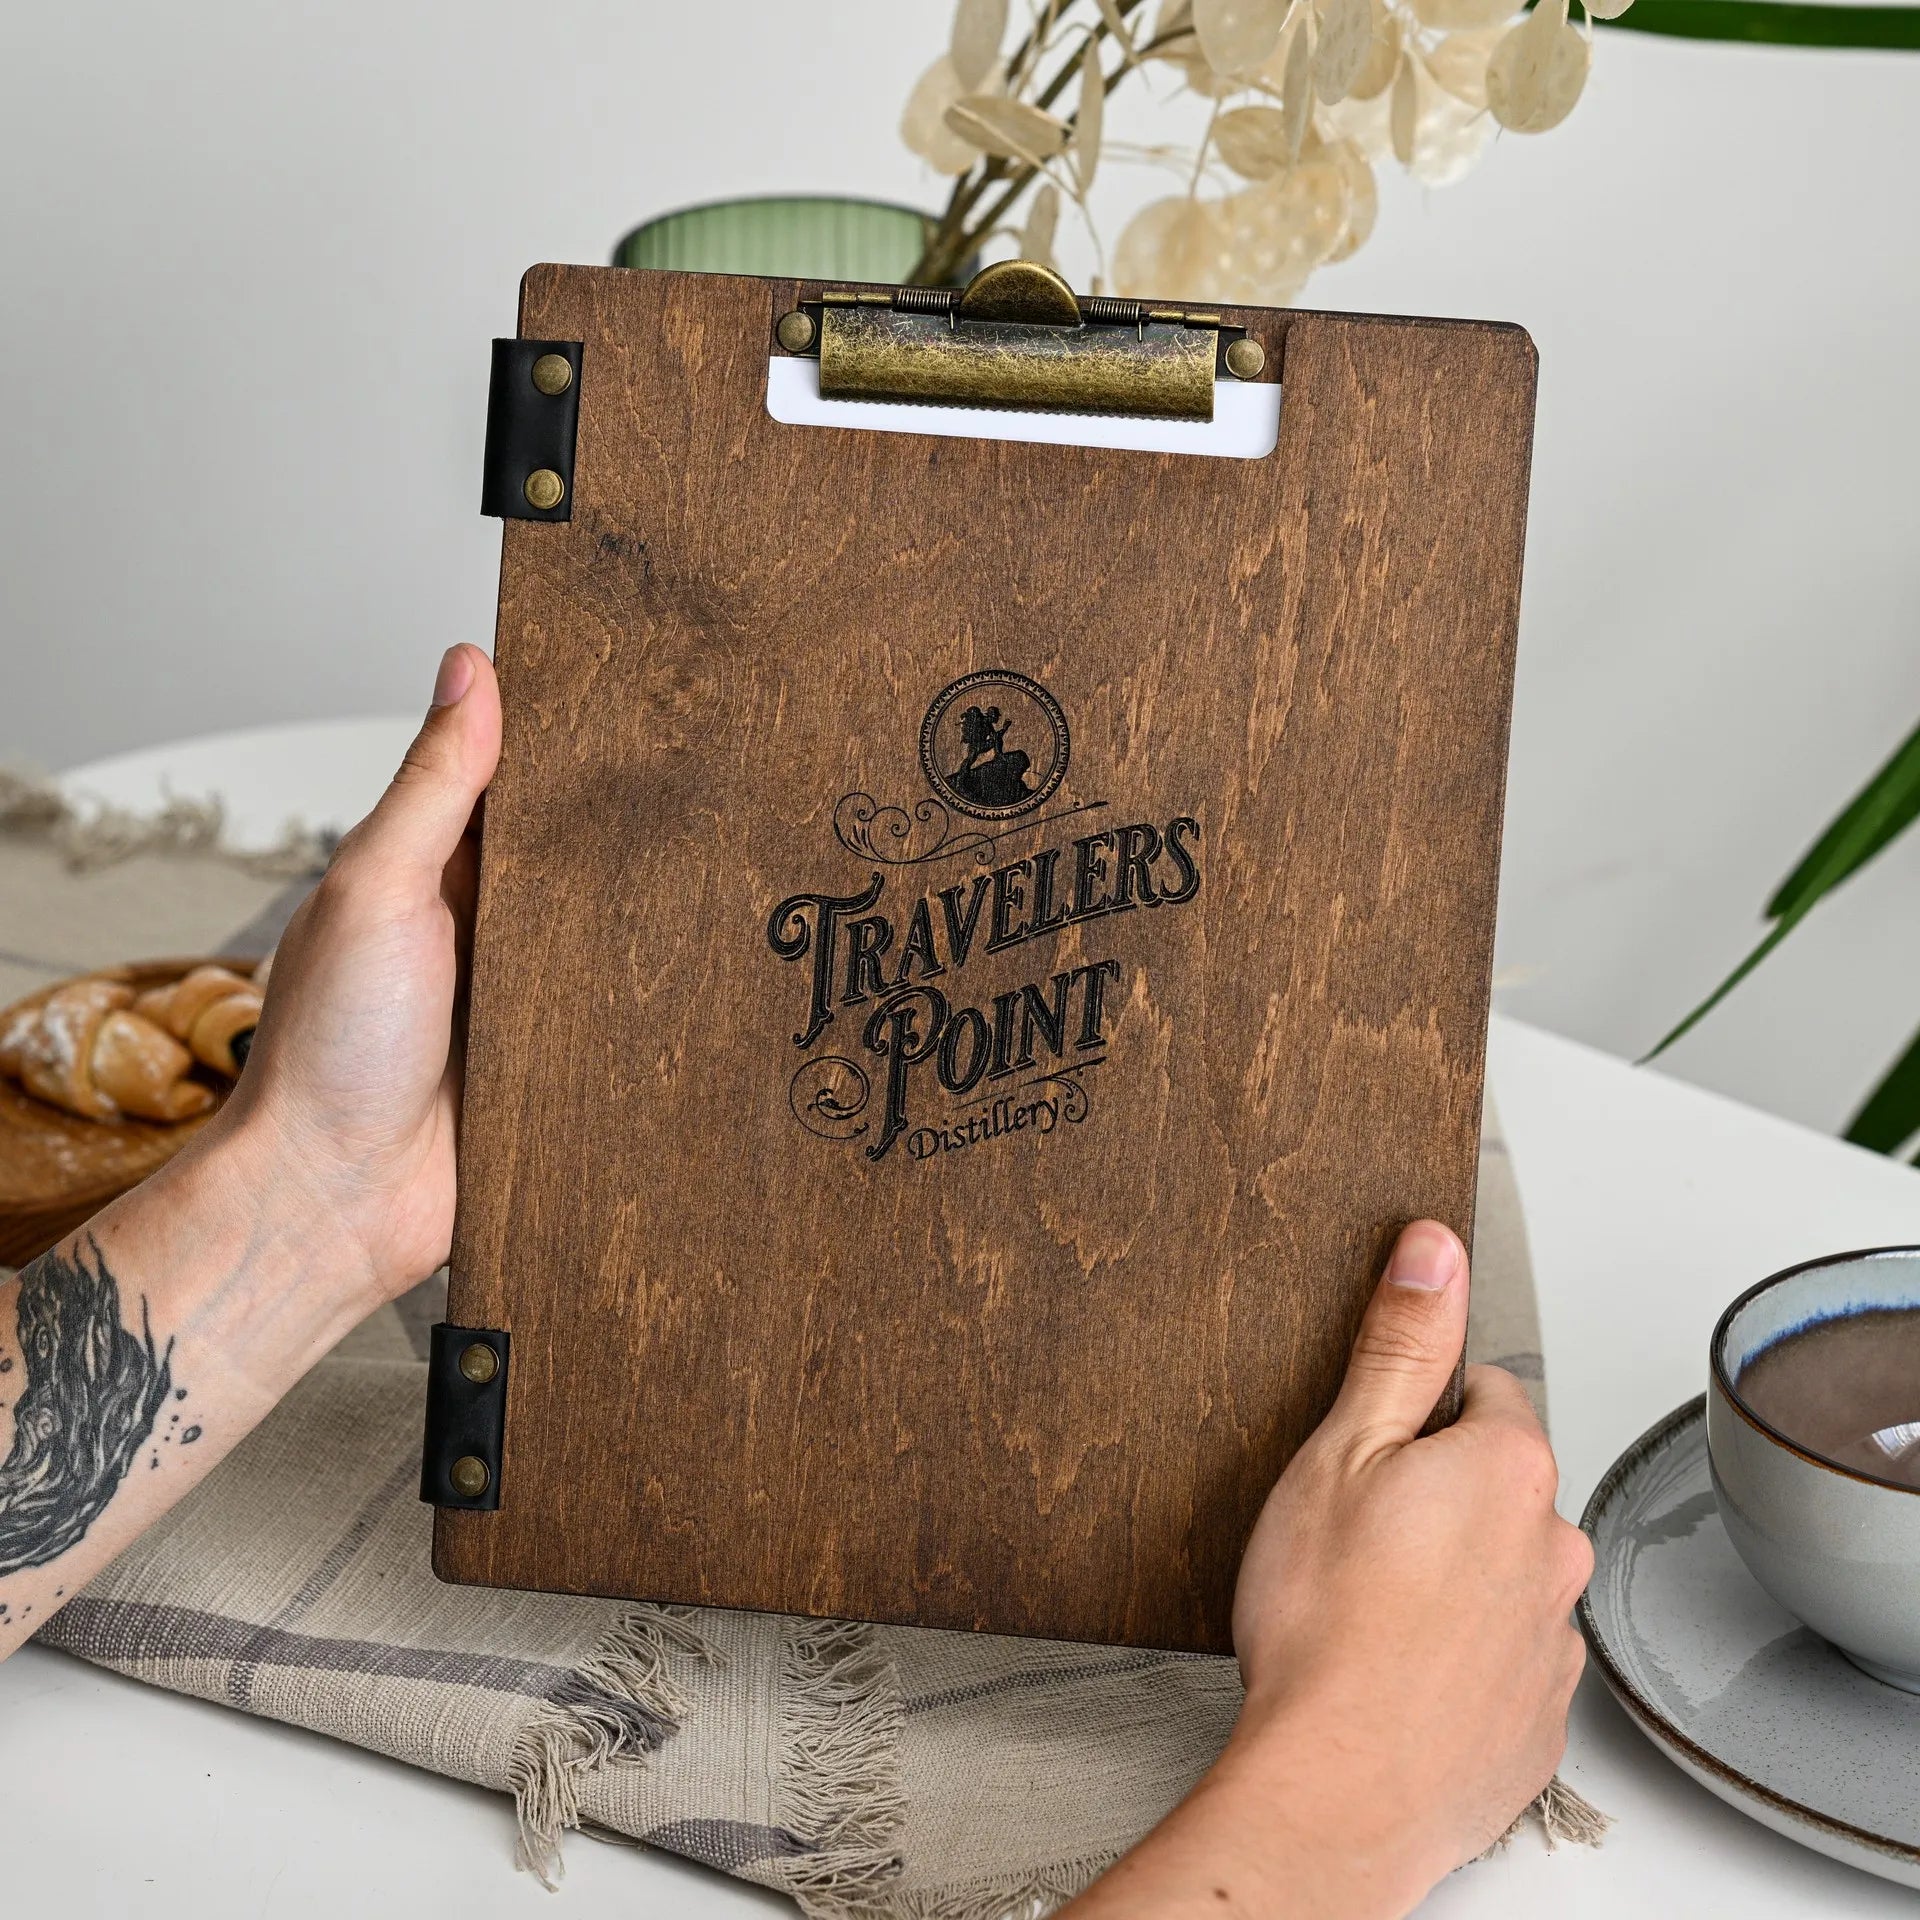  Elevate your presentation with our engraved wooden menu holder, adding rustic charm to your restaurant.